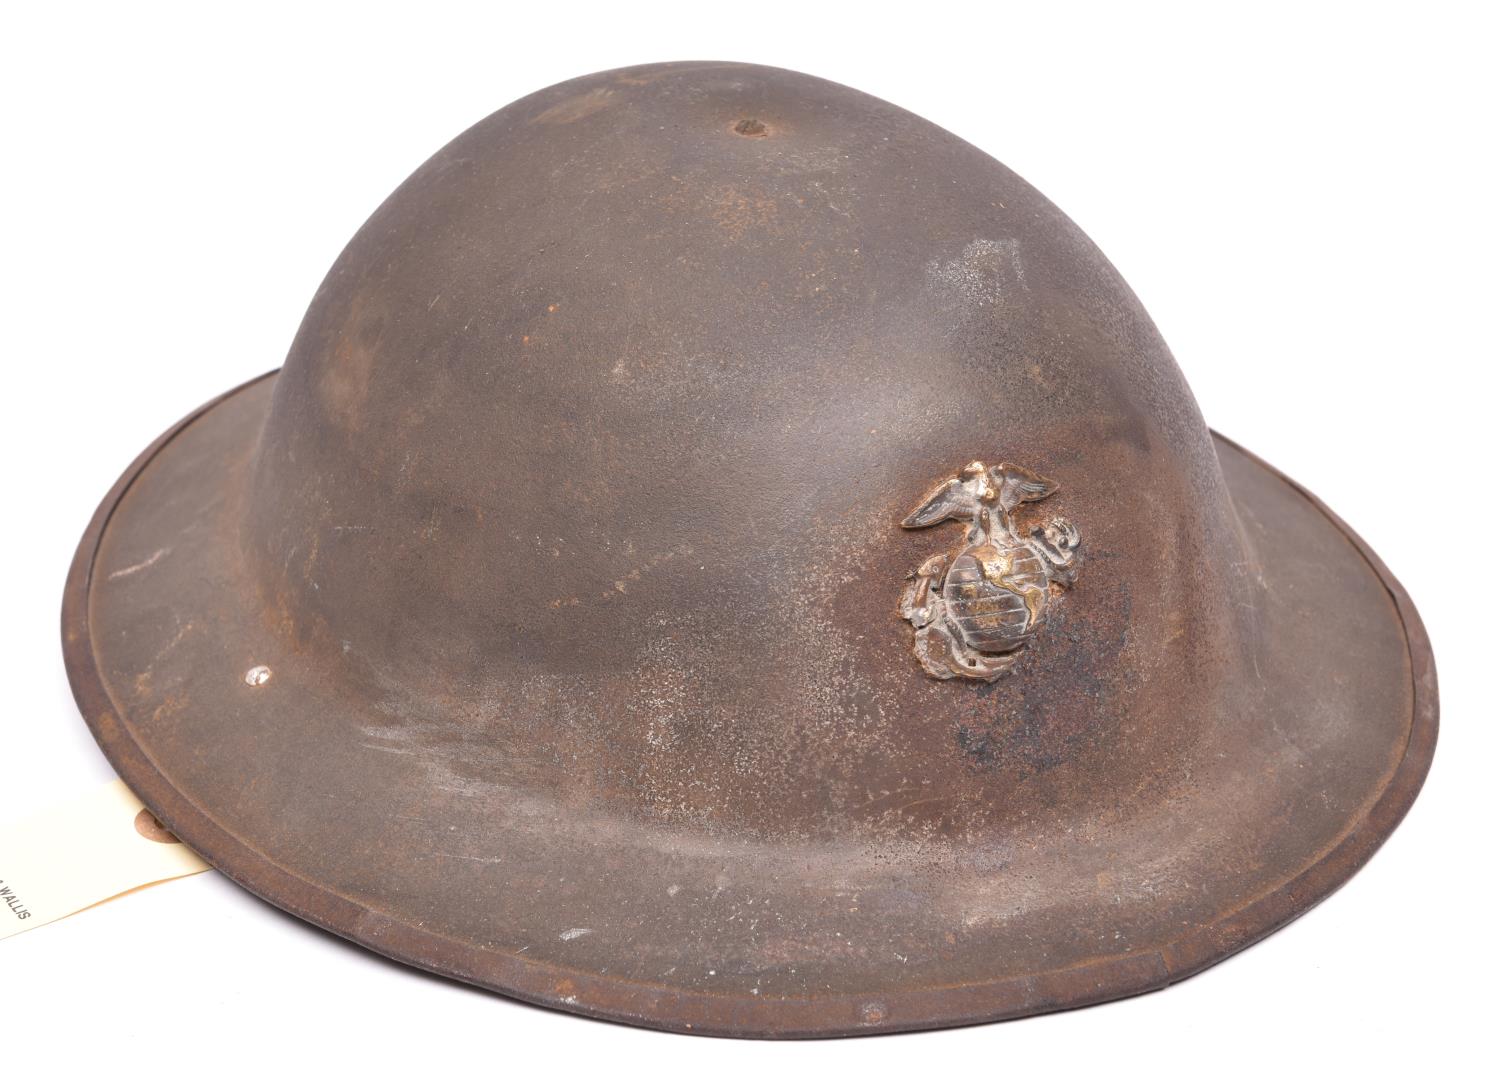 A WWI Brodie’s pattern steel helmet, with soldered on US Marine Corps badge, leather, netting and